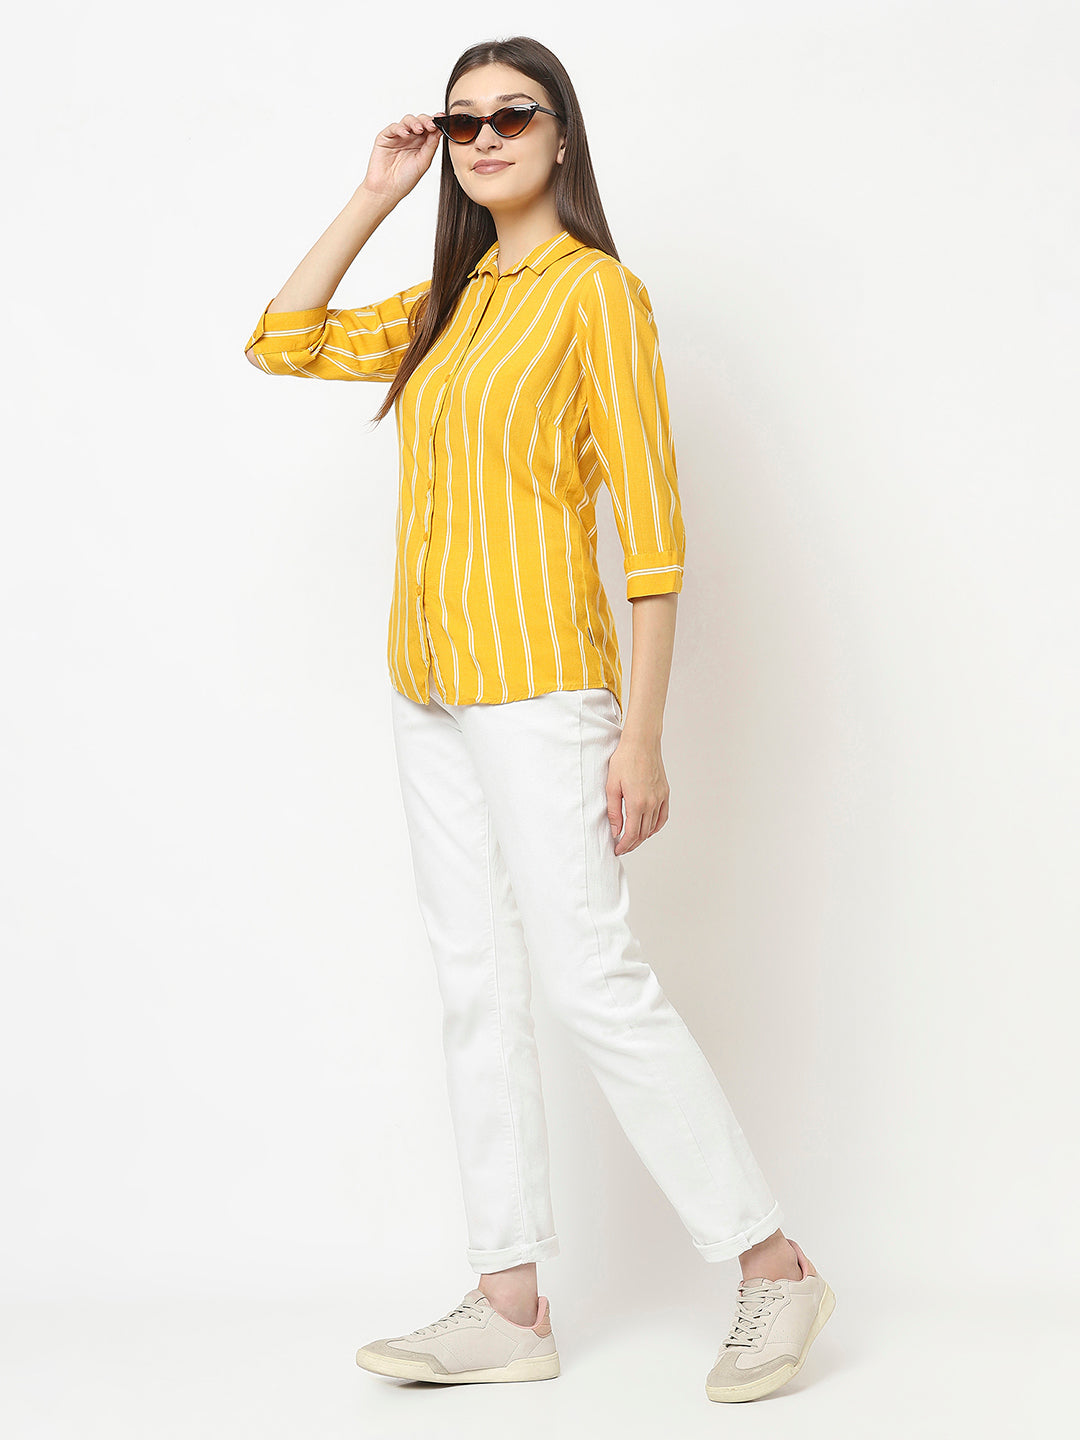 Striped Yellow Shirt in Cotton